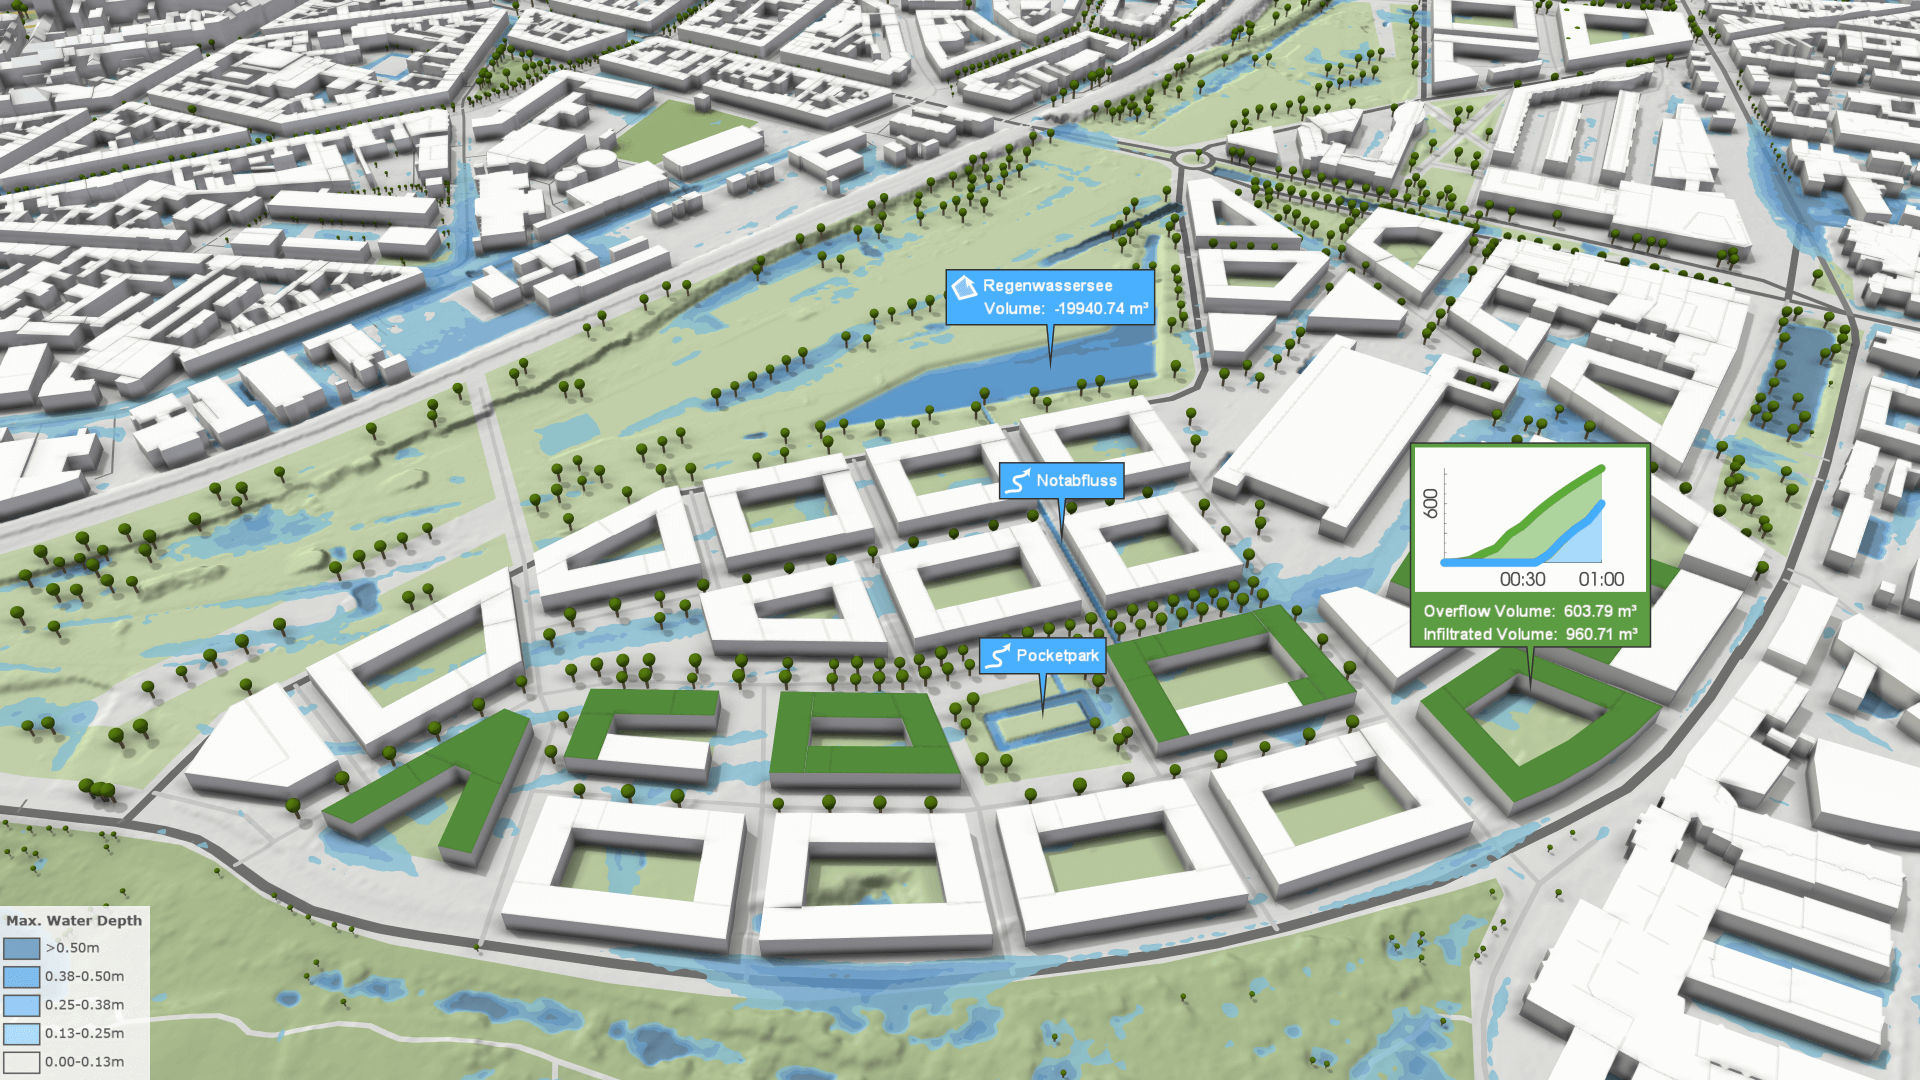 Visualization of a city district with different coloured floor plans in the VRVis simulation software Visdom.